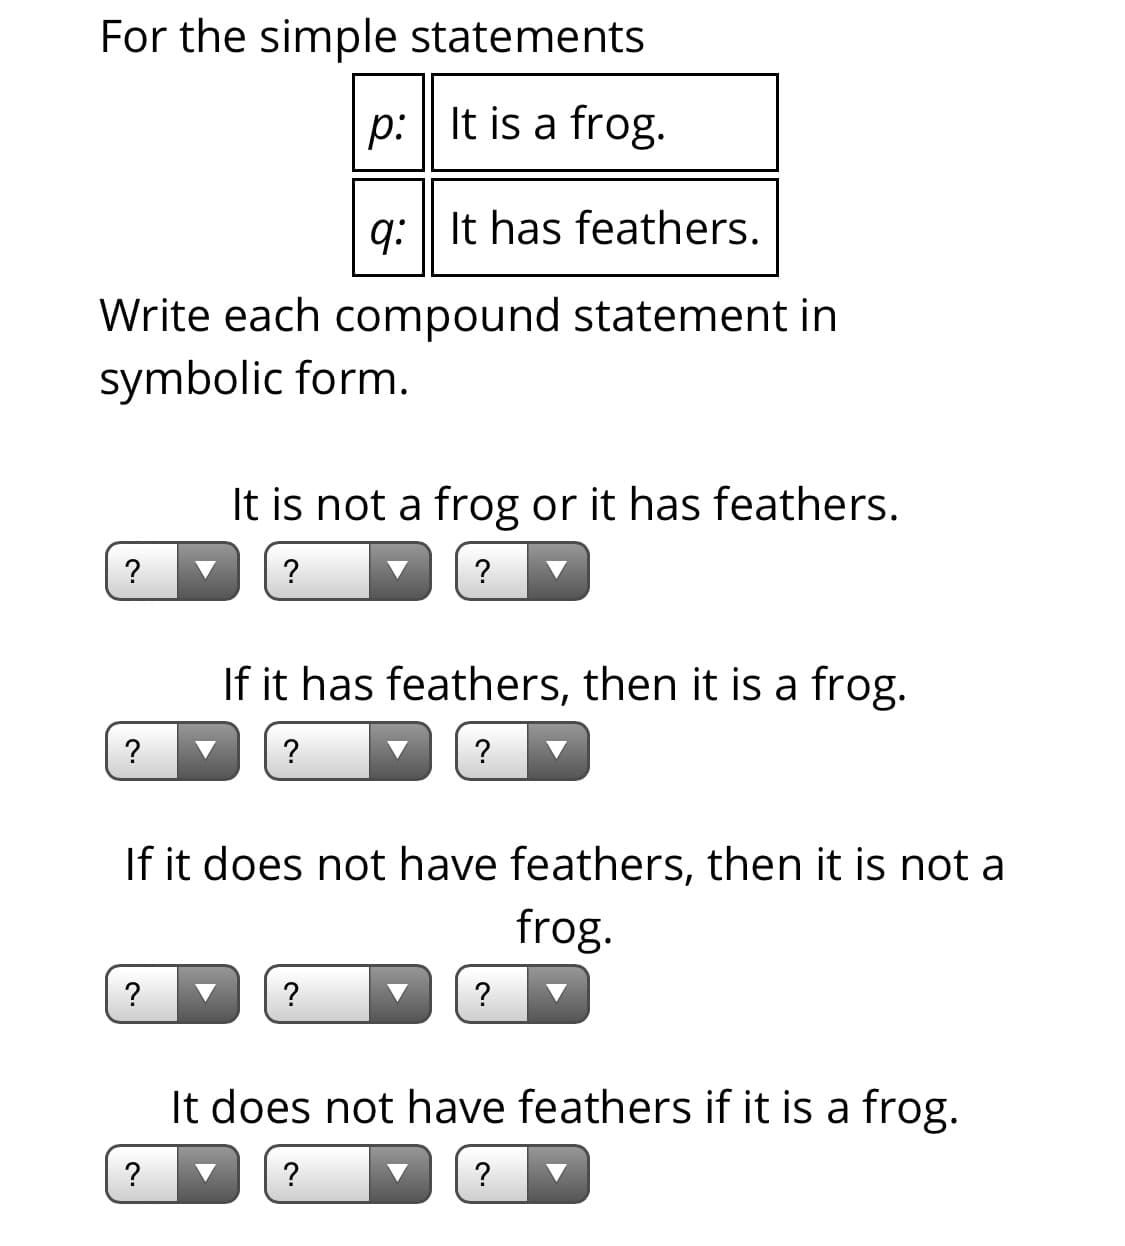 For the simple statements
p: | It is a frog.
q: | It has feathers.
Write each compound statement in
symbolic form.
It is not a frog or it has feathers.
?
?
If it has feathers, then it is a frog.
?
?
If it does not have feathers, then it is not a
frog.
?
?
?
It does not have feathers if it is a frog.
?
?
?
